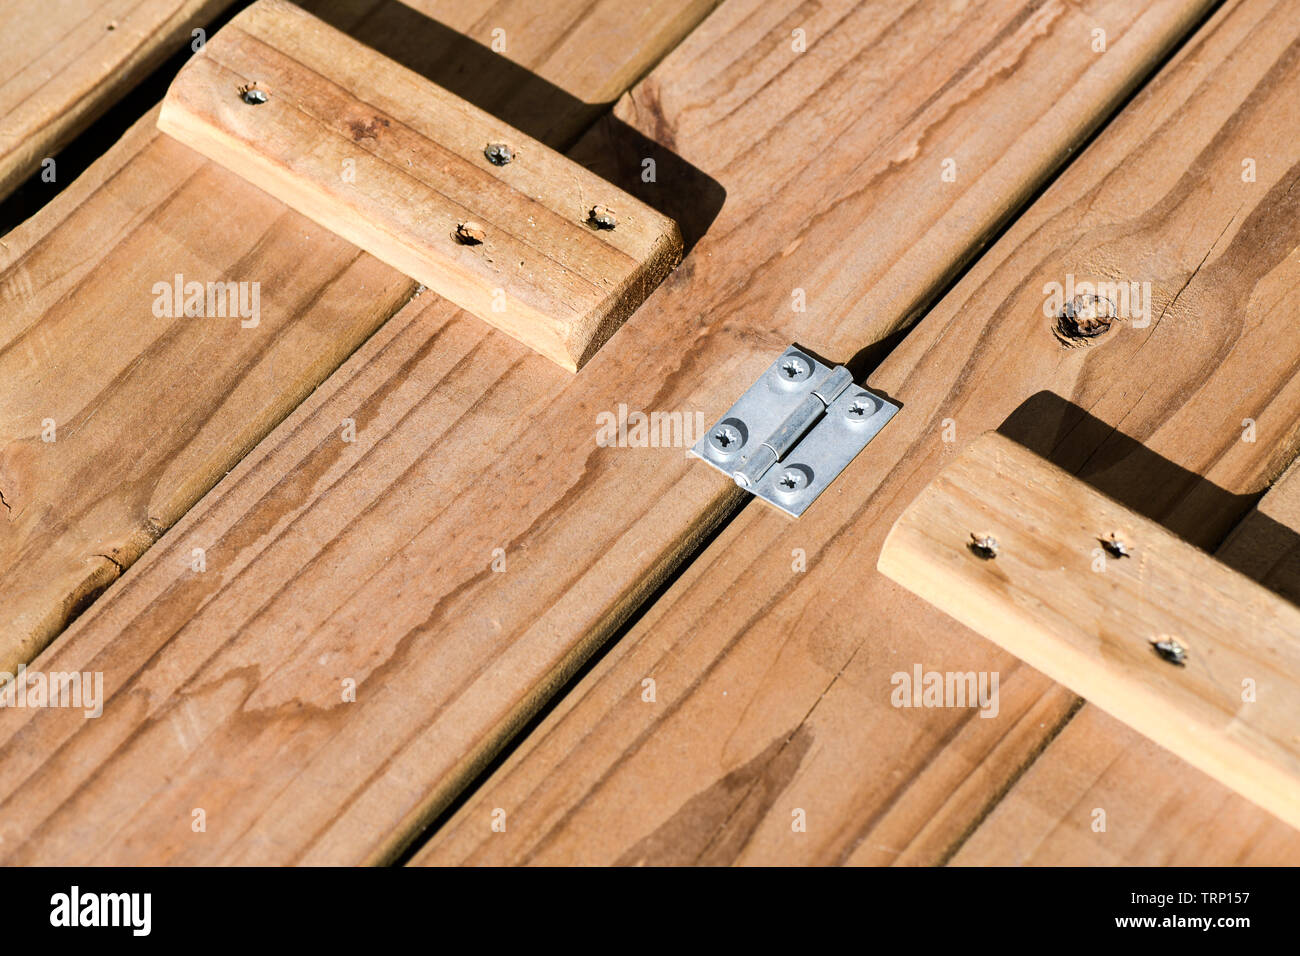 A macro photo of the lid of a wooden storage box put together with steel hinges pop riveted and supported by solid wood blocks. Check the  patterns Stock Photo